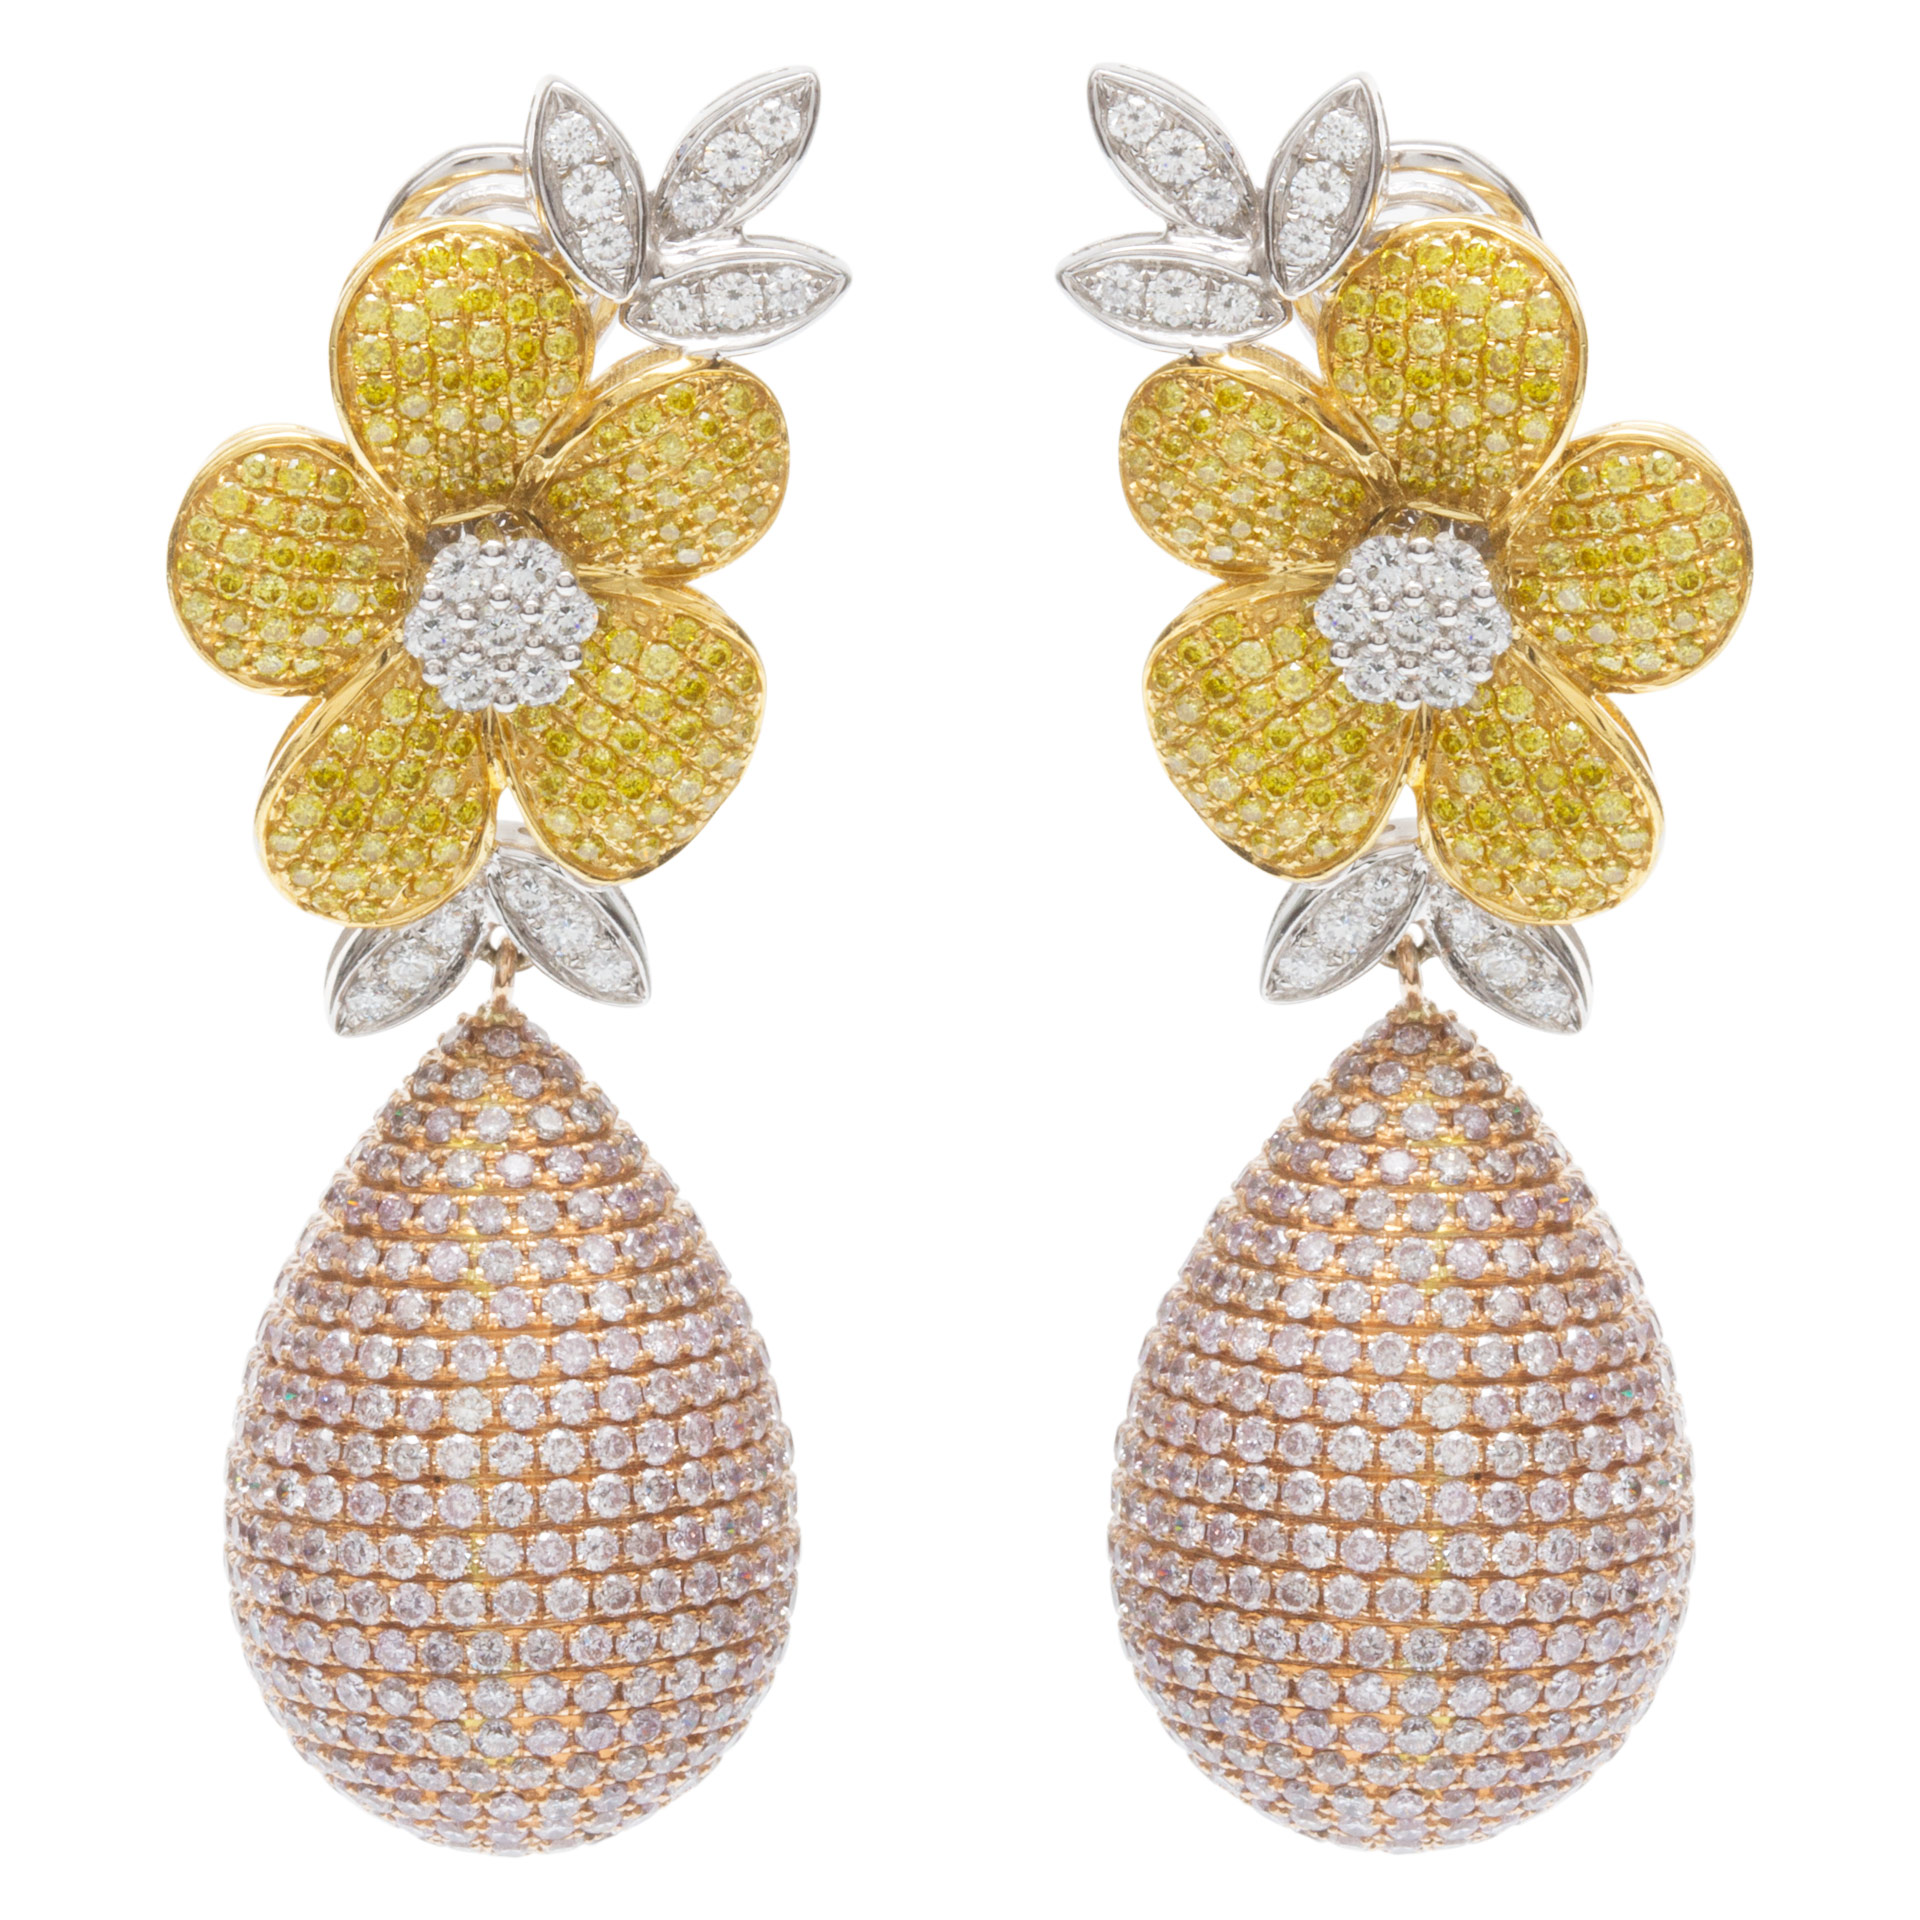 Glamorous flower diamond earrings with approx. 13. 50 carats white, natural pink & brown/yellow diamonds set in 18K tri-color gold. image 1